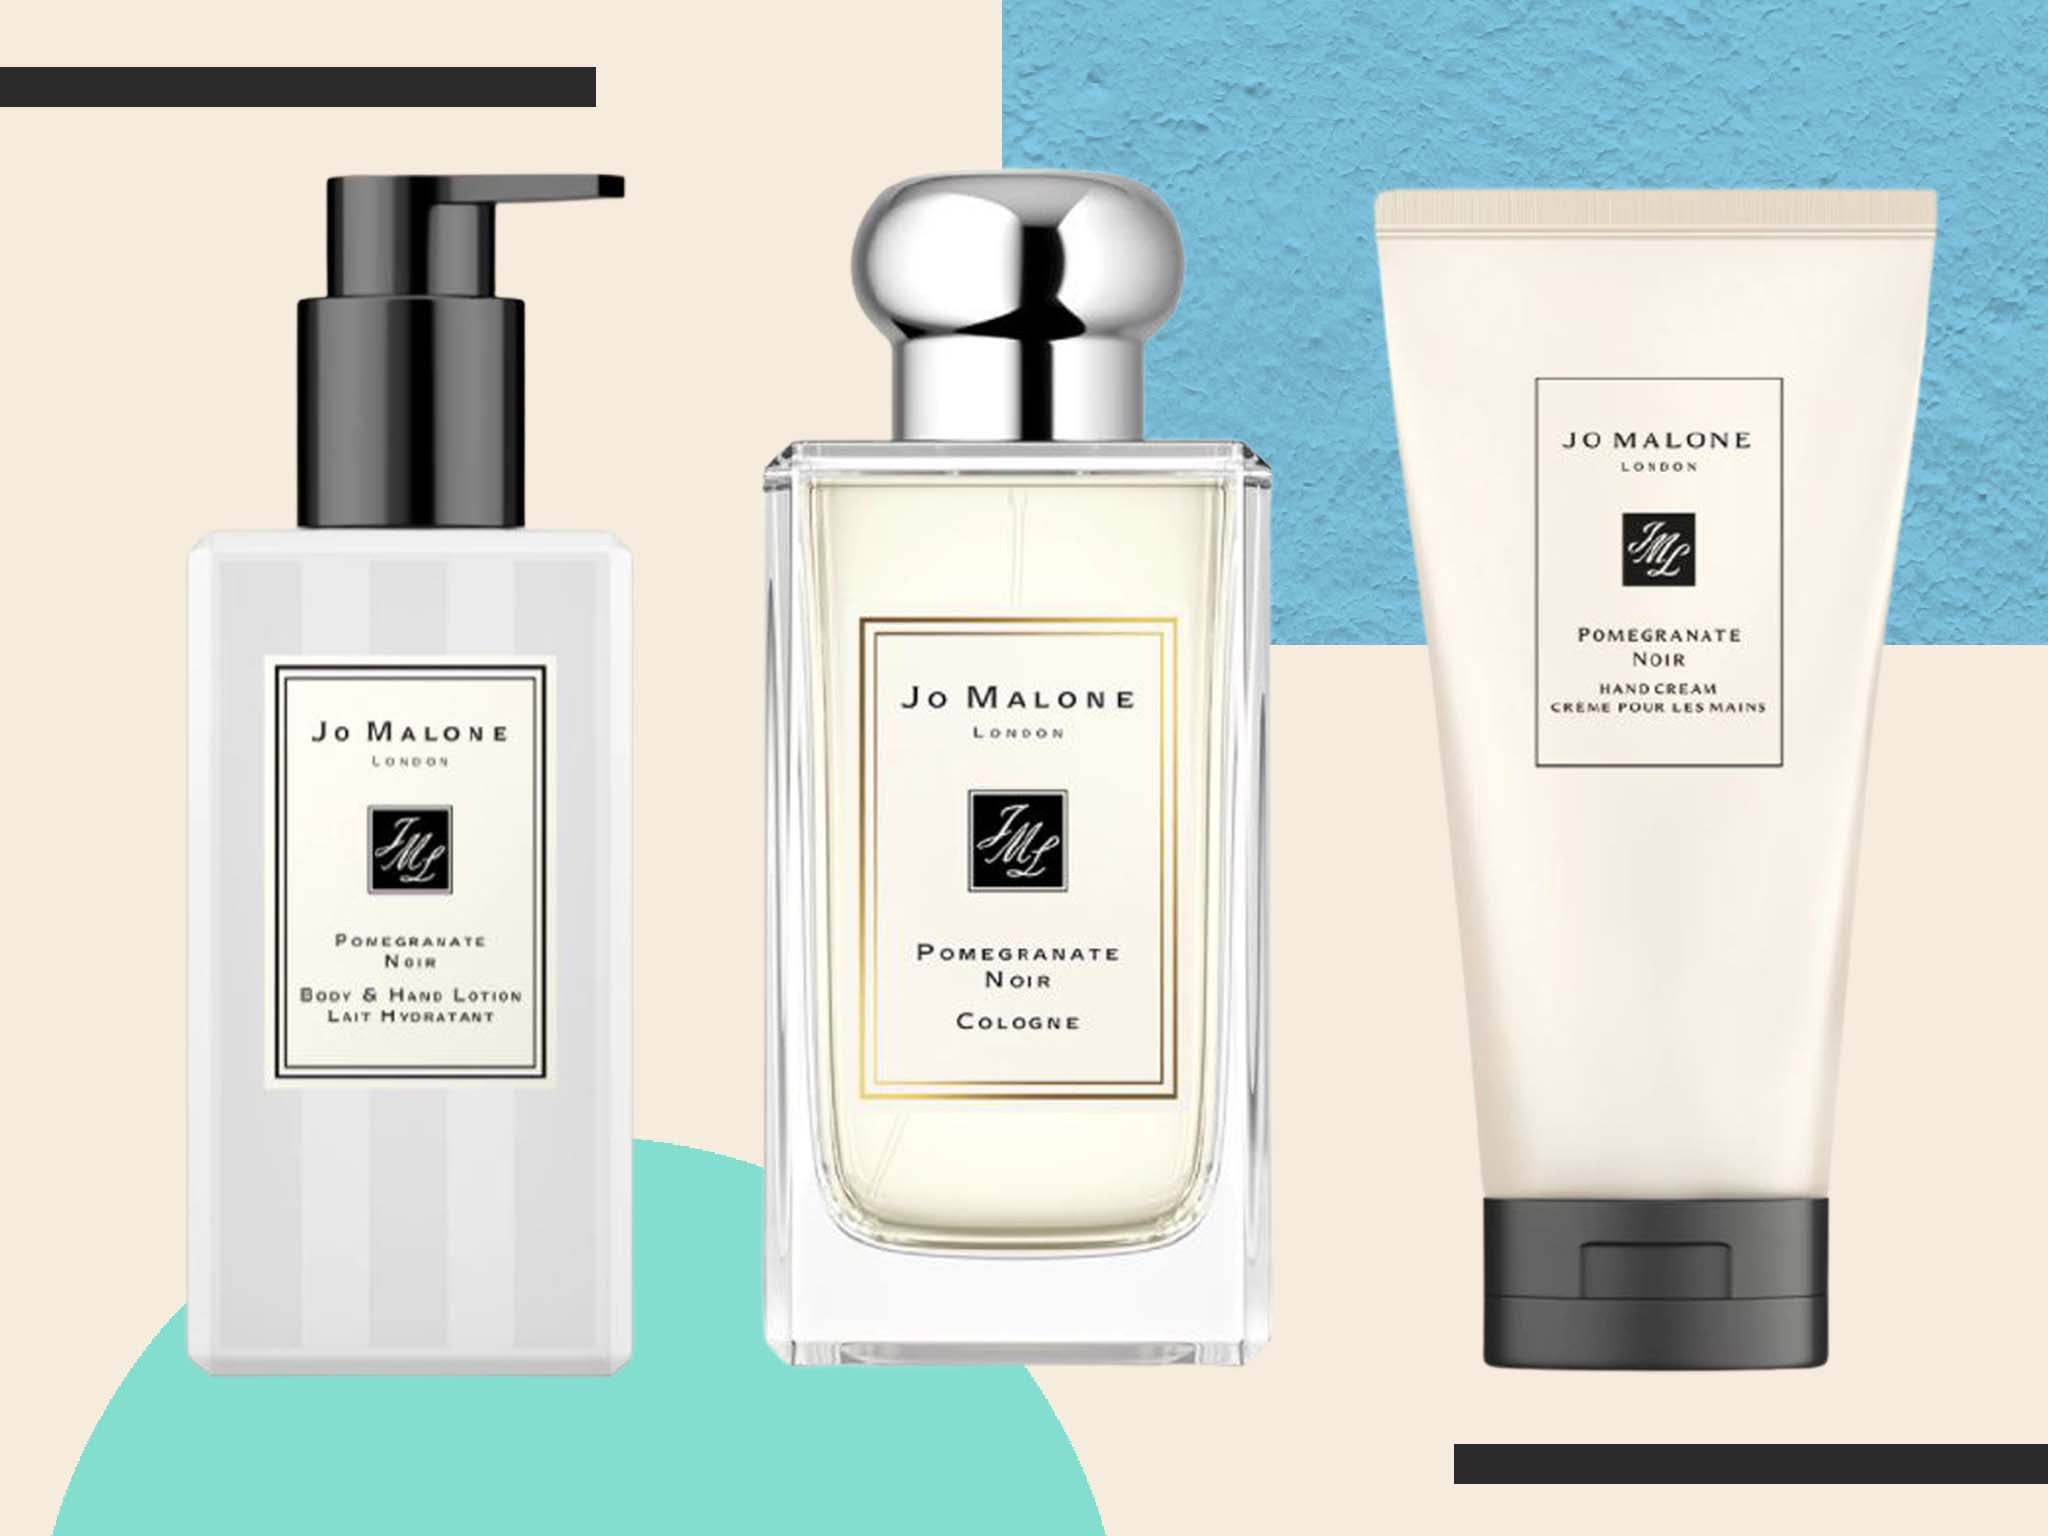 Get some scentsational bargains from the British brand